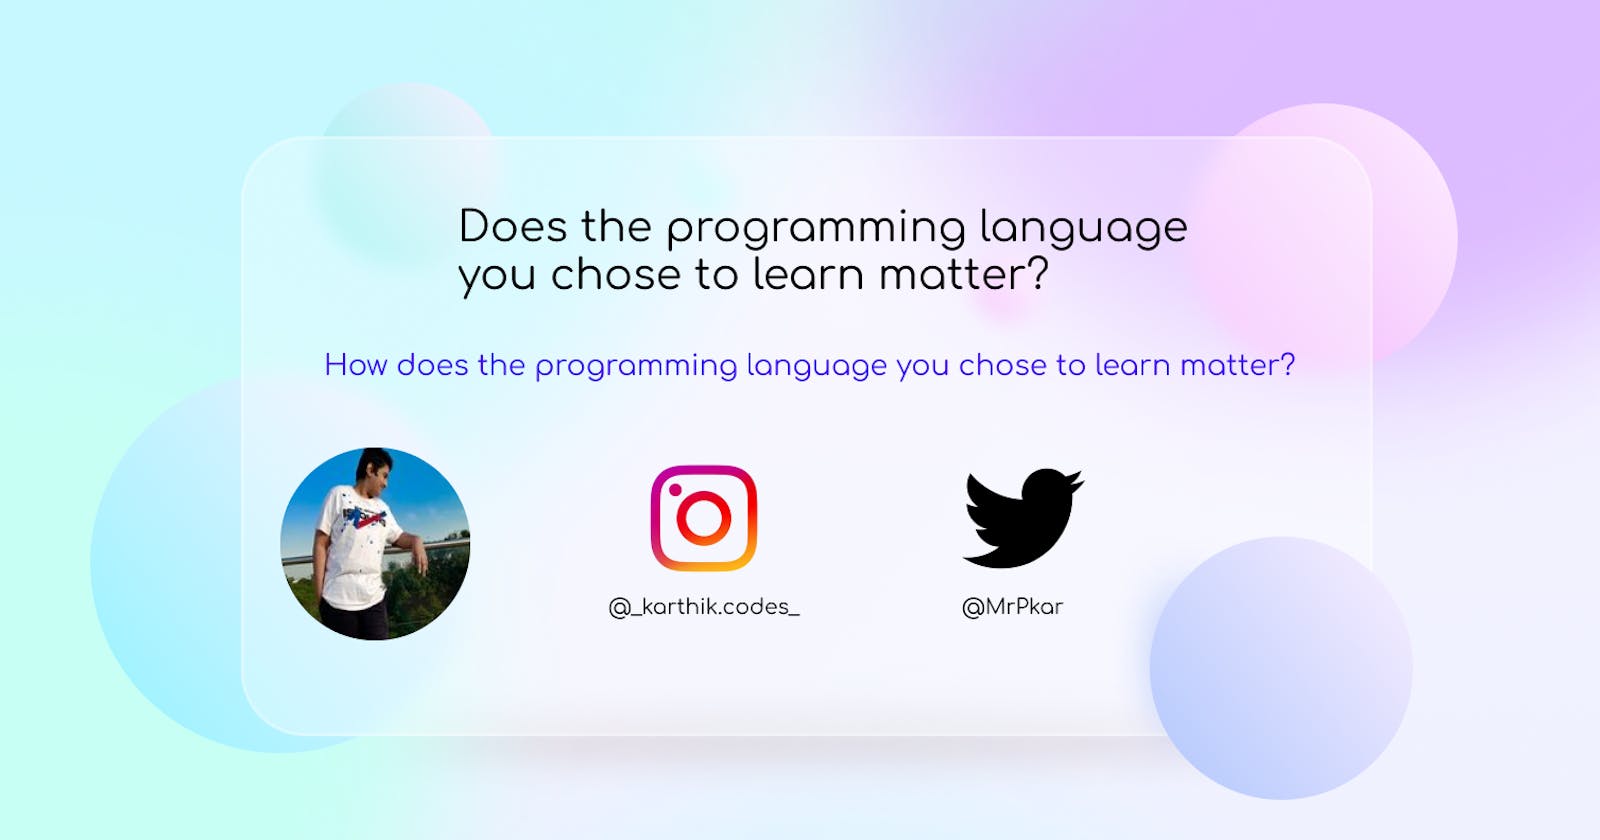 Does the programming language you choose to learn matter?